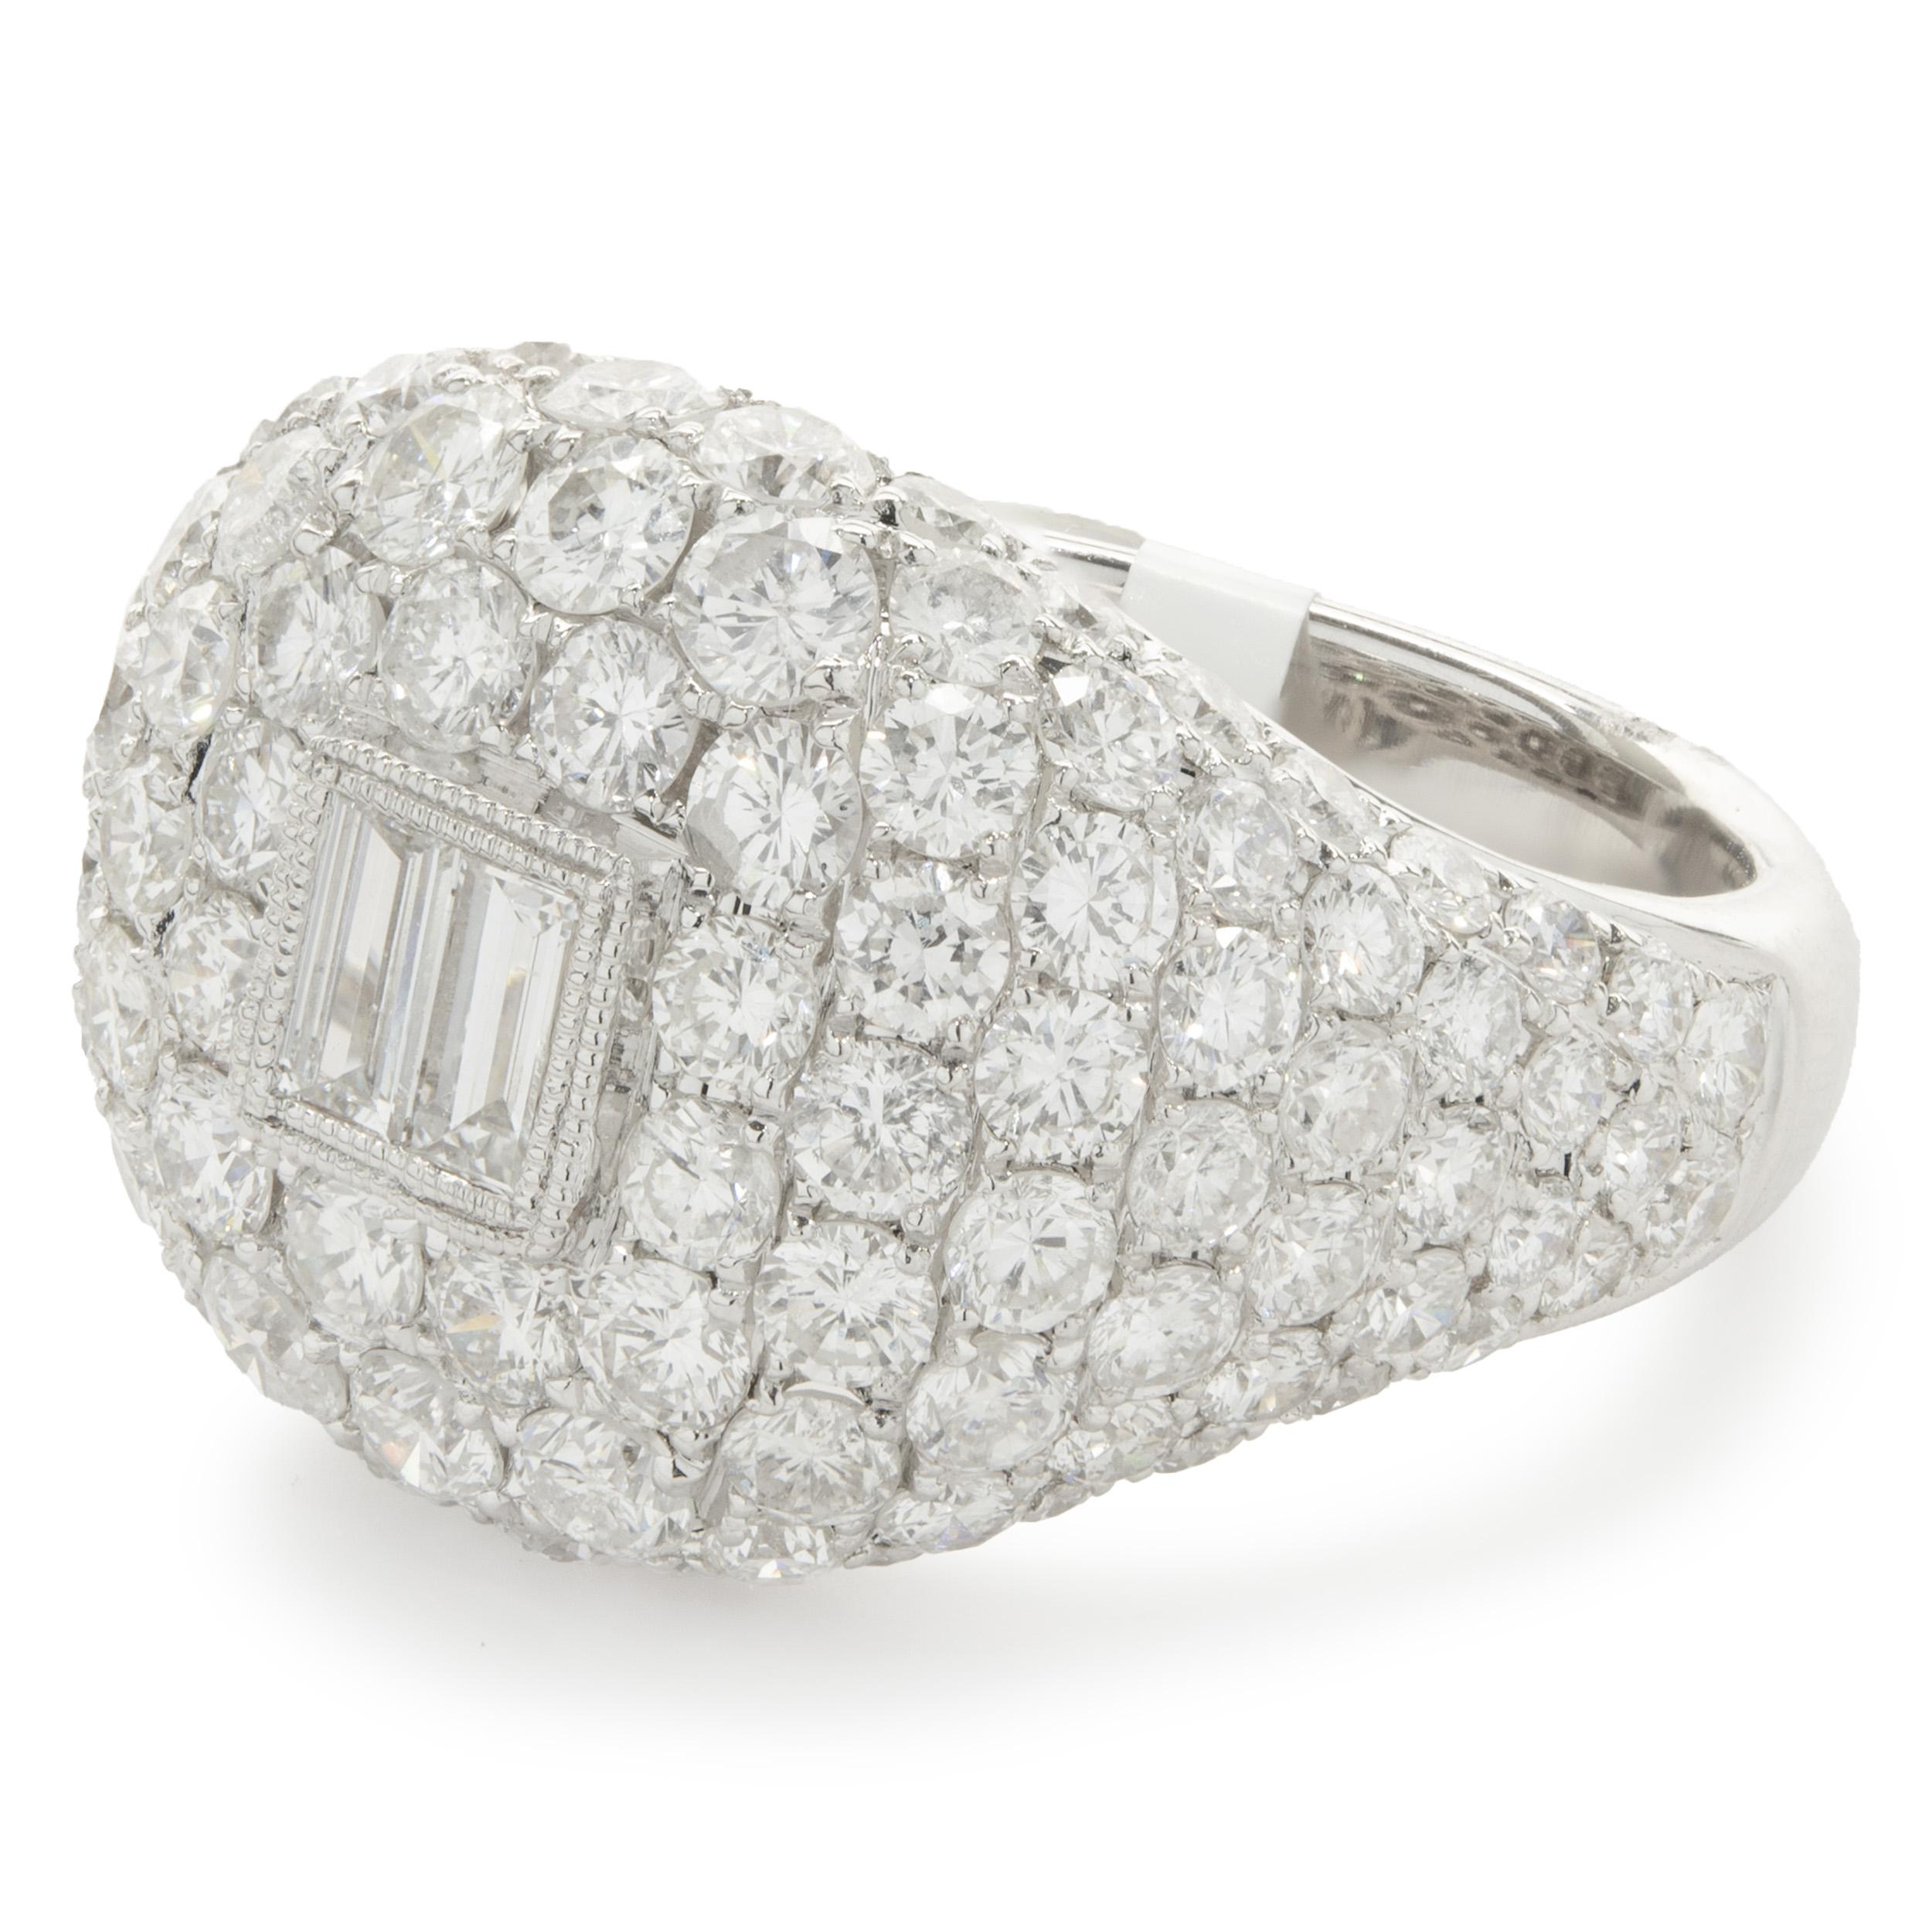 18 Karat White Gold Pave Diamond Signet Ring with Baguette Diamond Center In Excellent Condition For Sale In Scottsdale, AZ